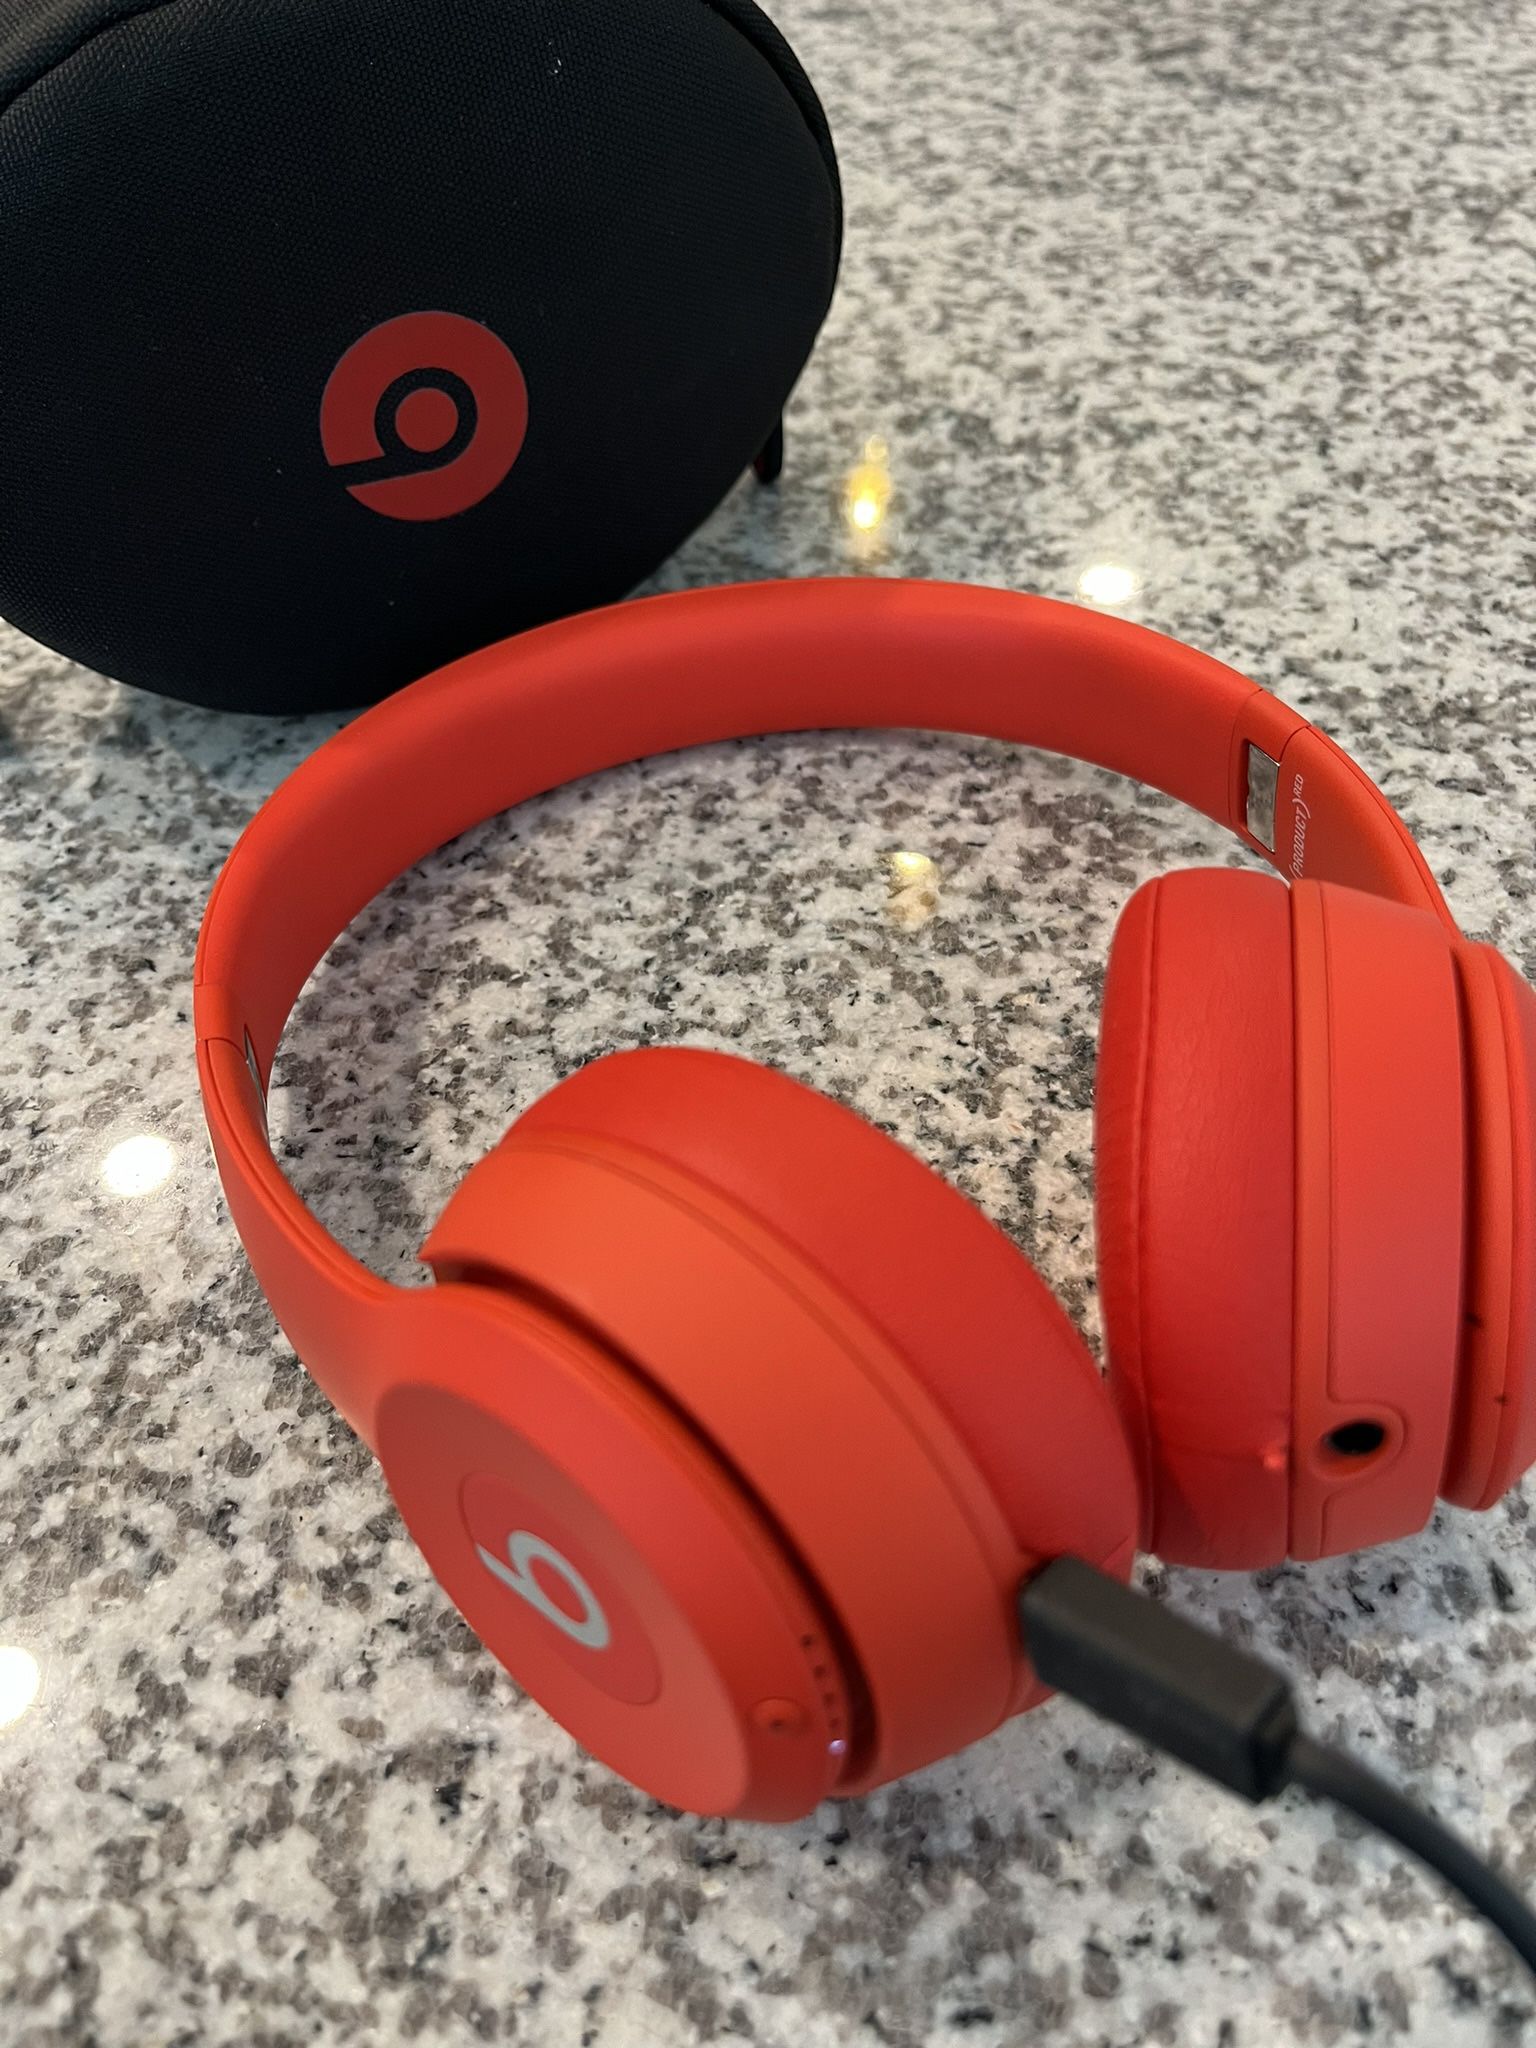 Beats Solo3 over ear product red headphones